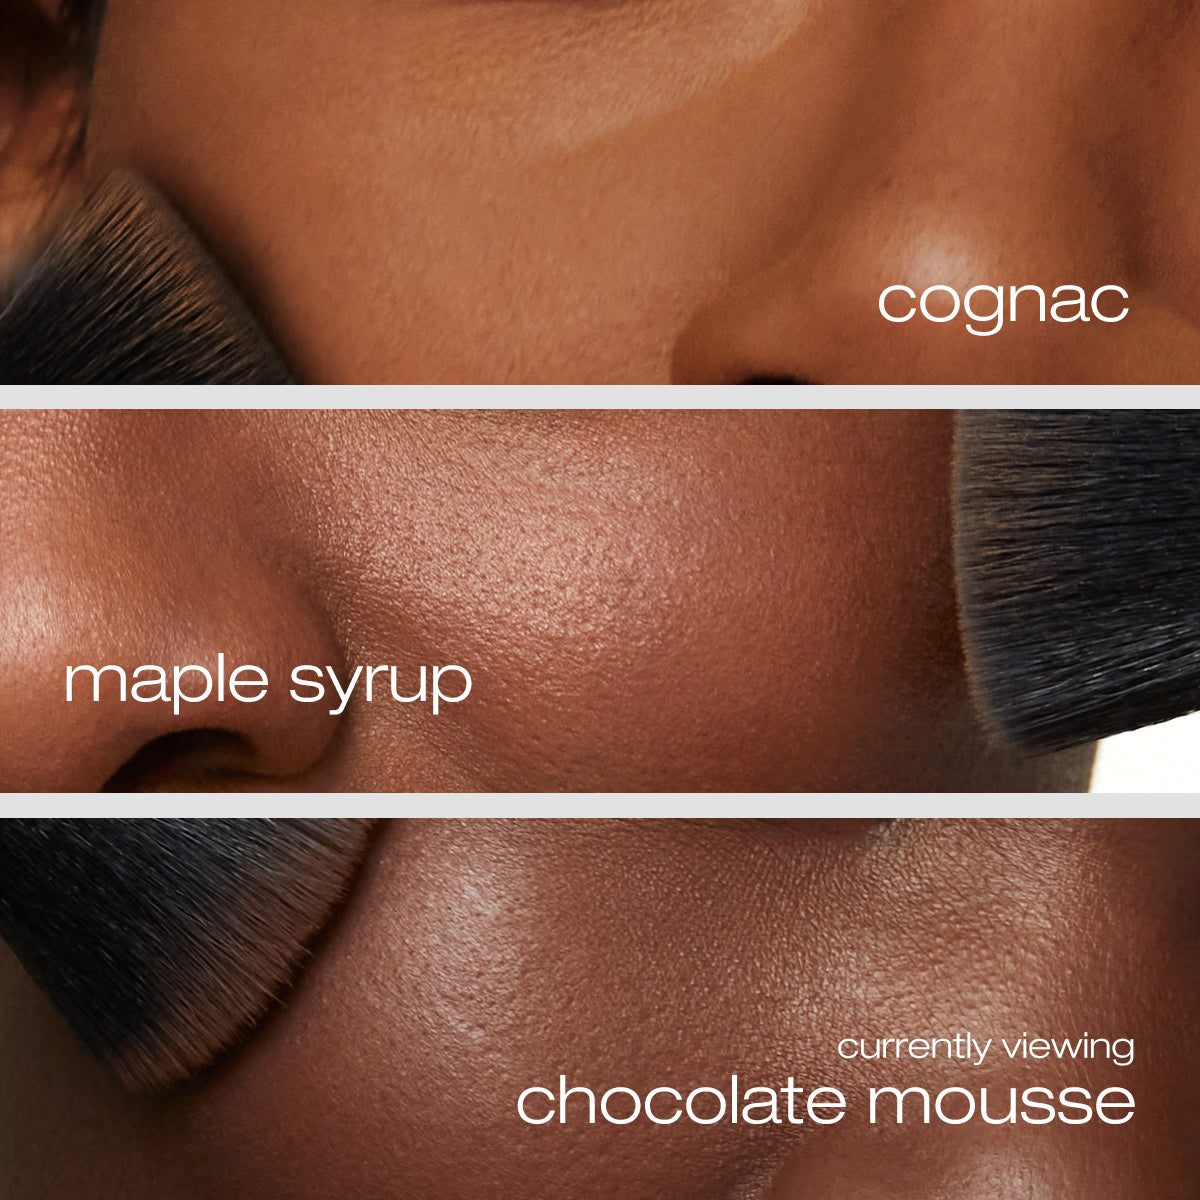 Model applying cognac, maple syrup, and chocolate mousse foundation on cheeks